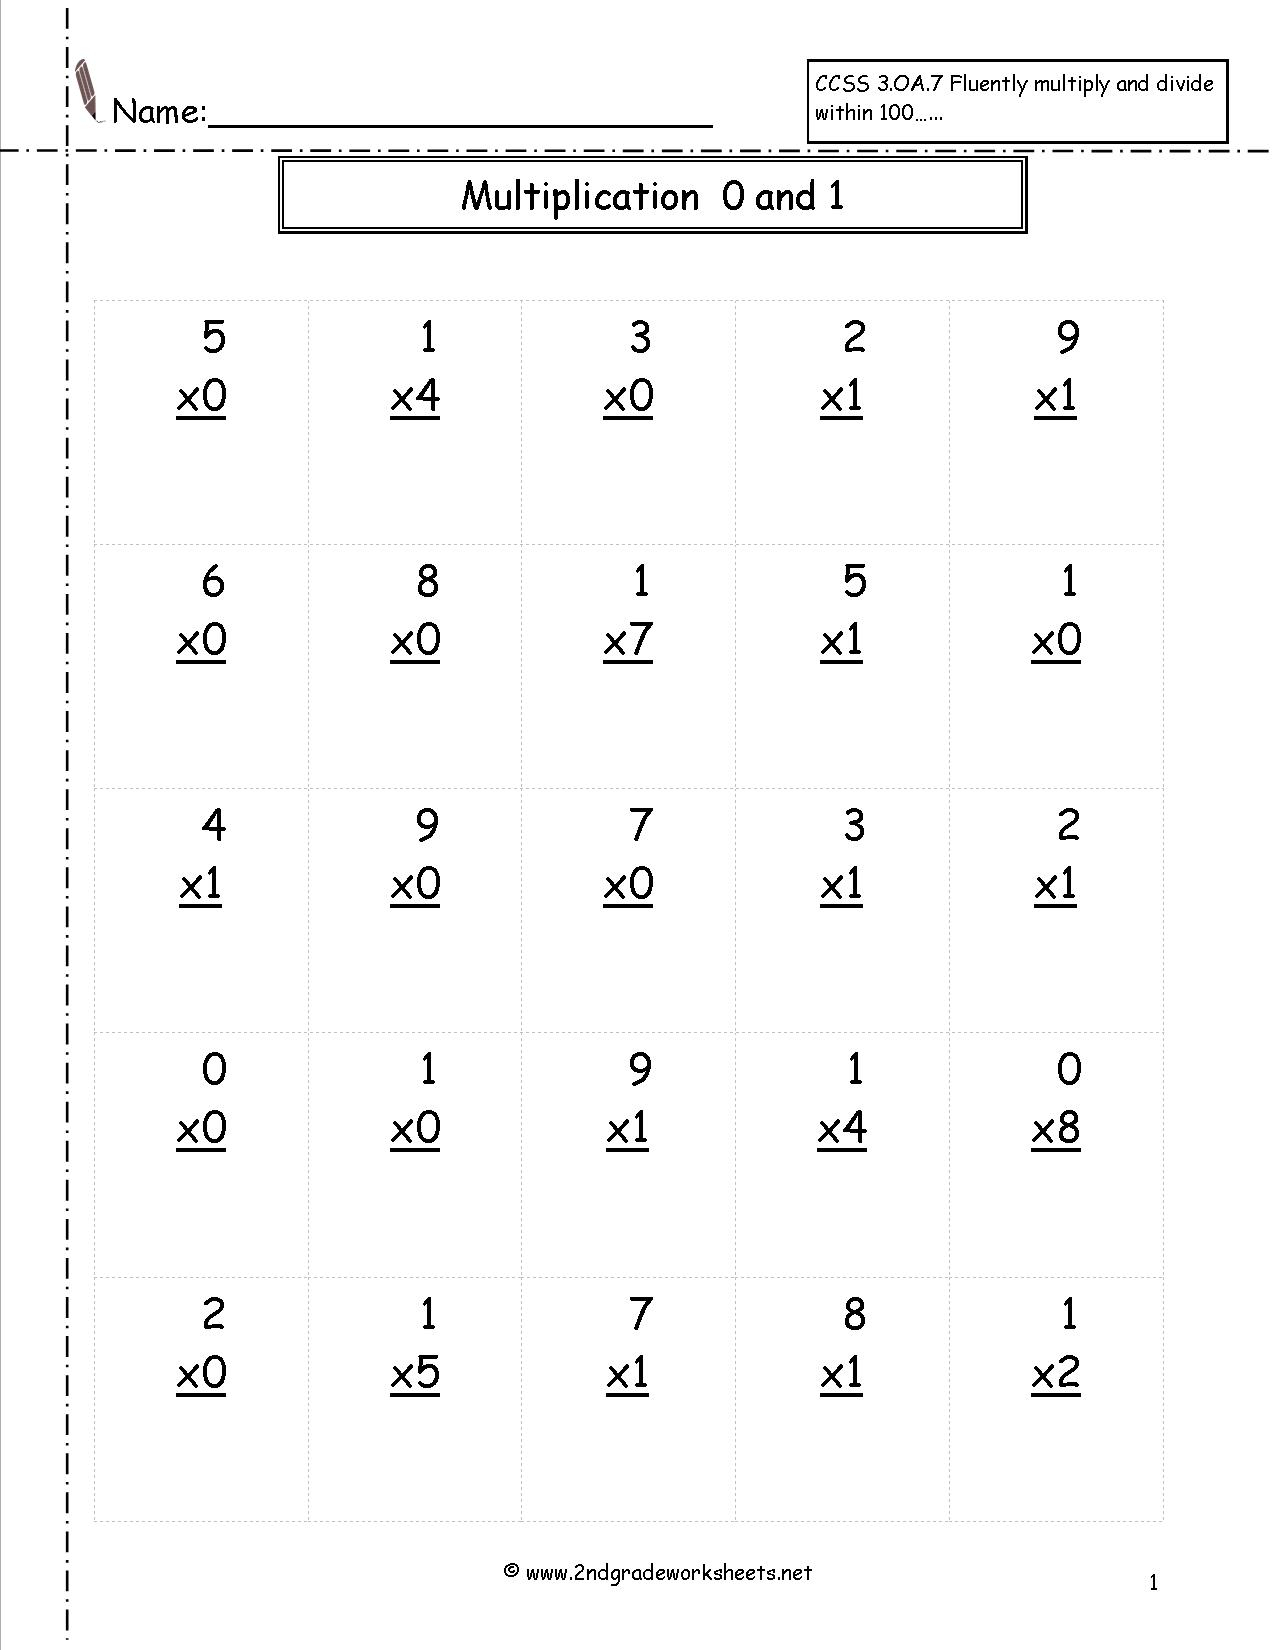 Multiplication Worksheets And Printouts pertaining to Free Printable 6 Multiplication Worksheets